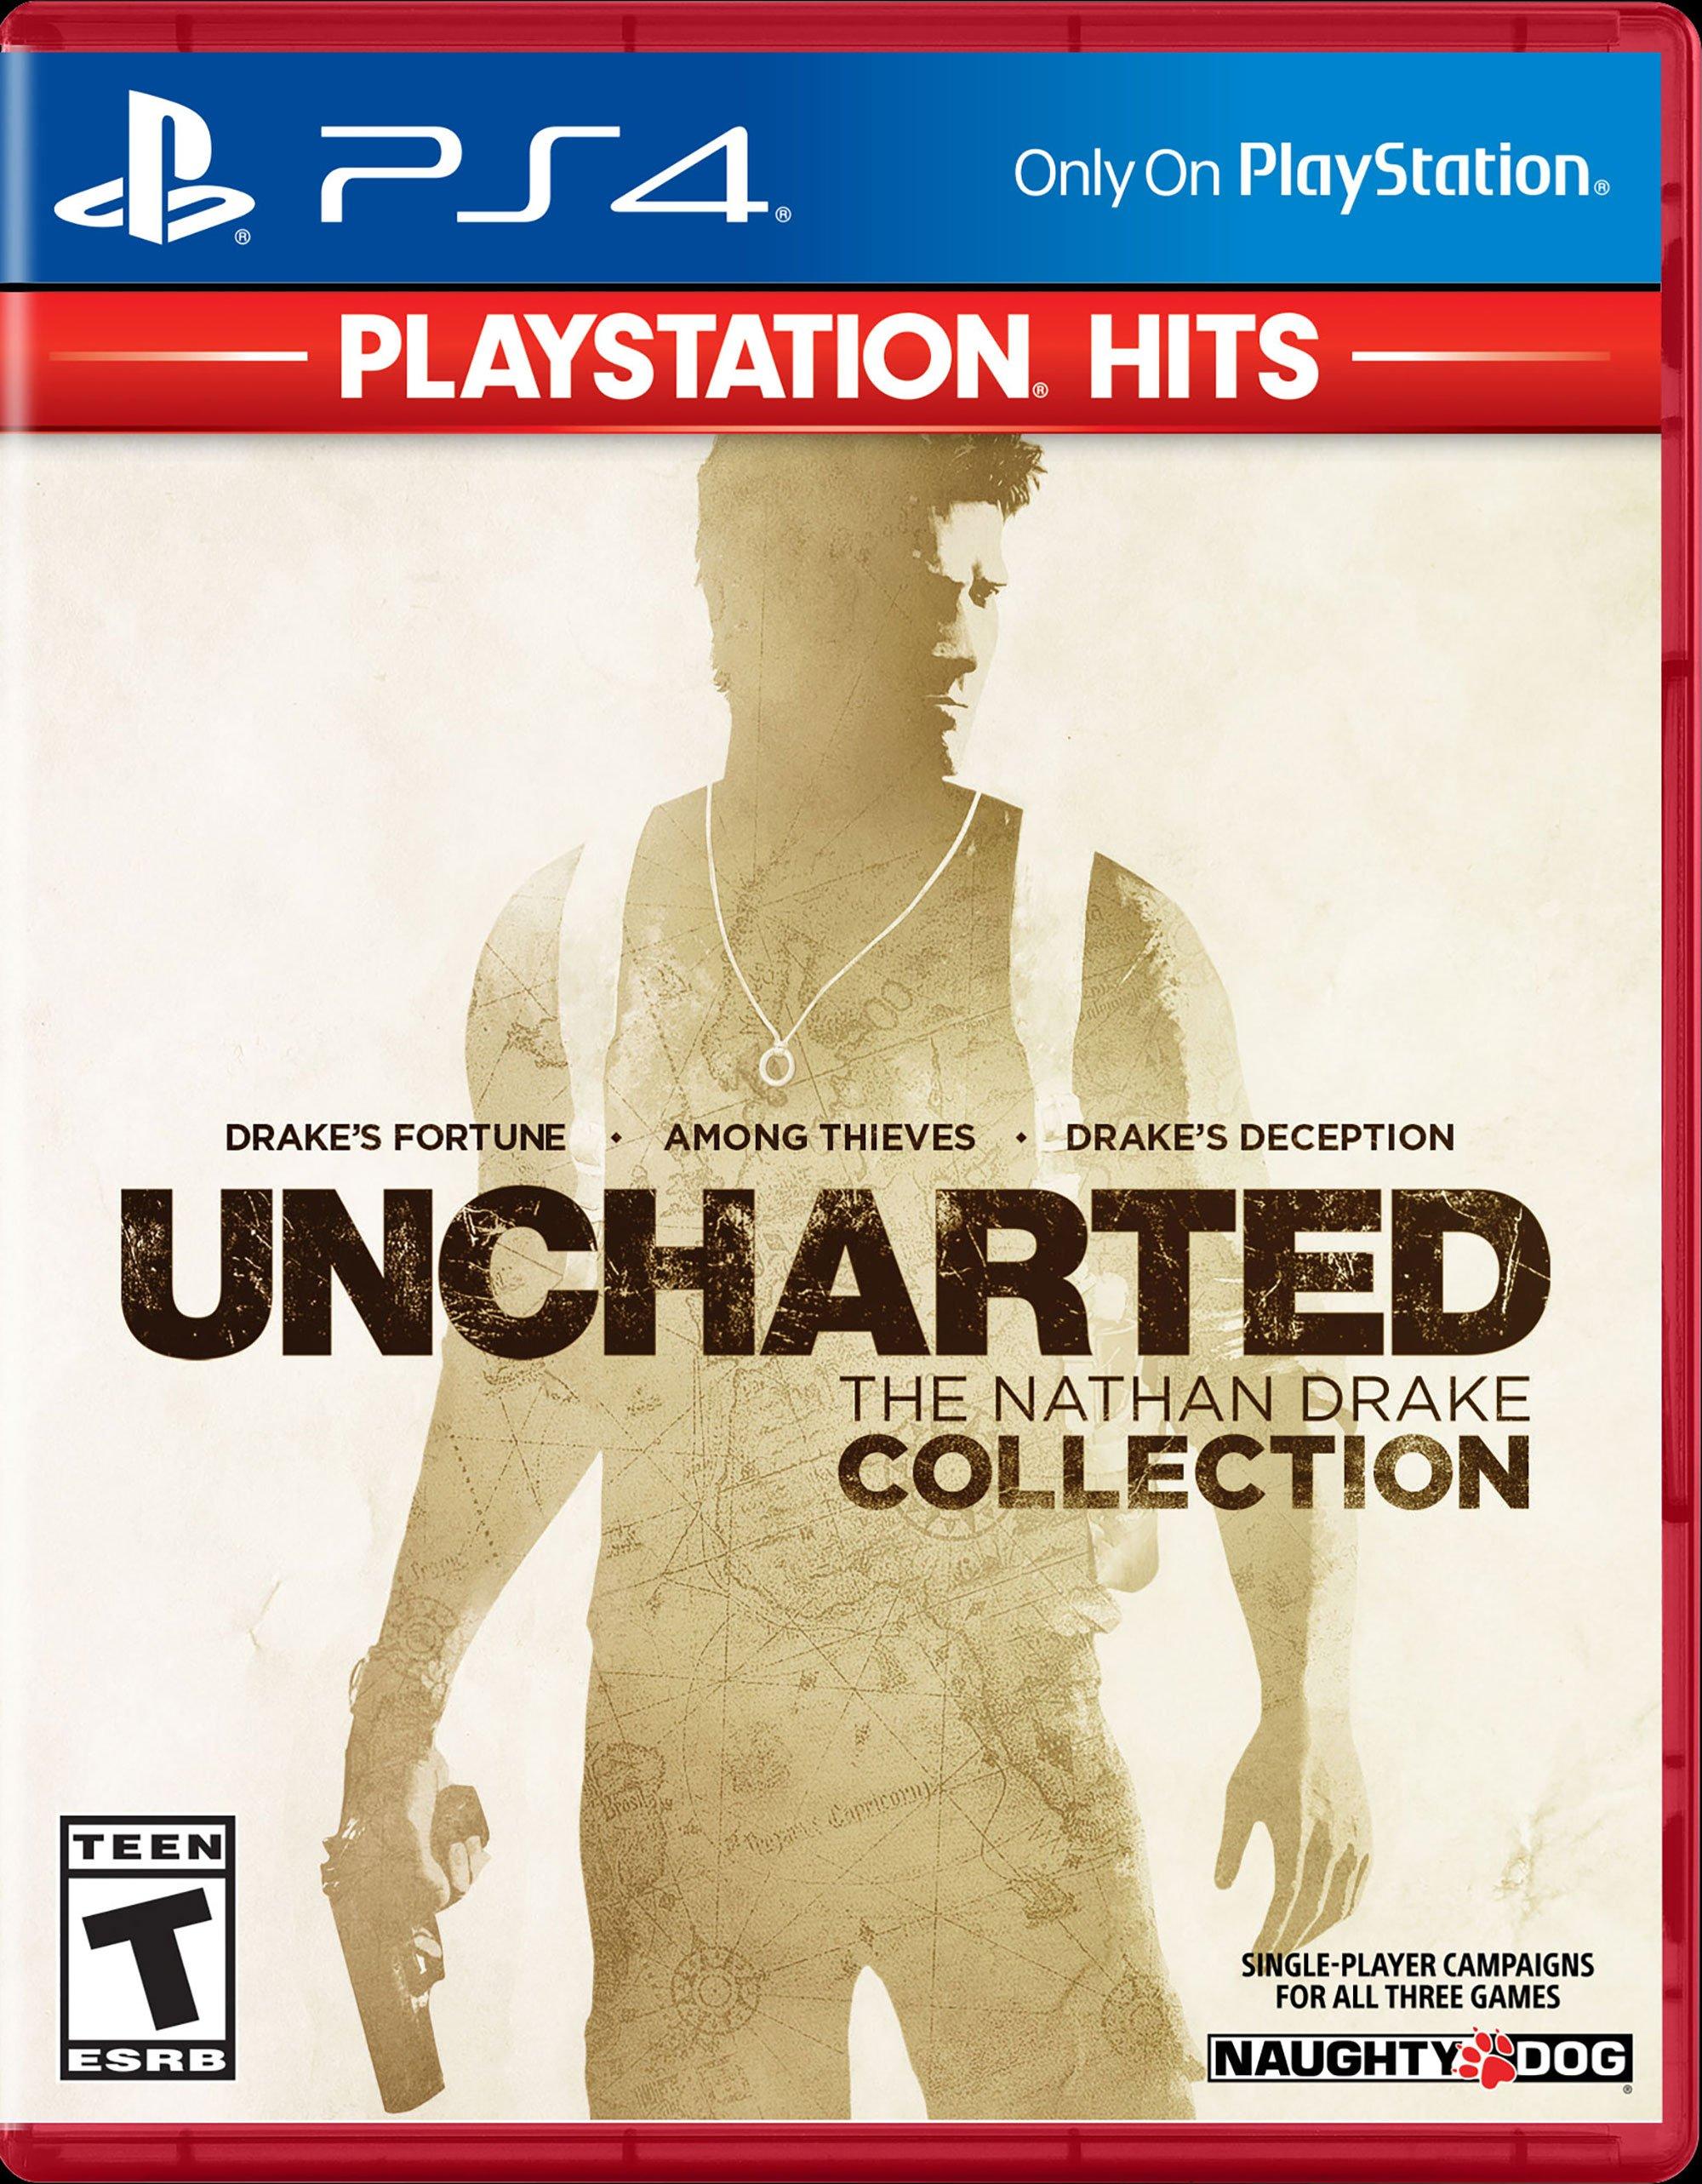 latest uncharted ps4 game